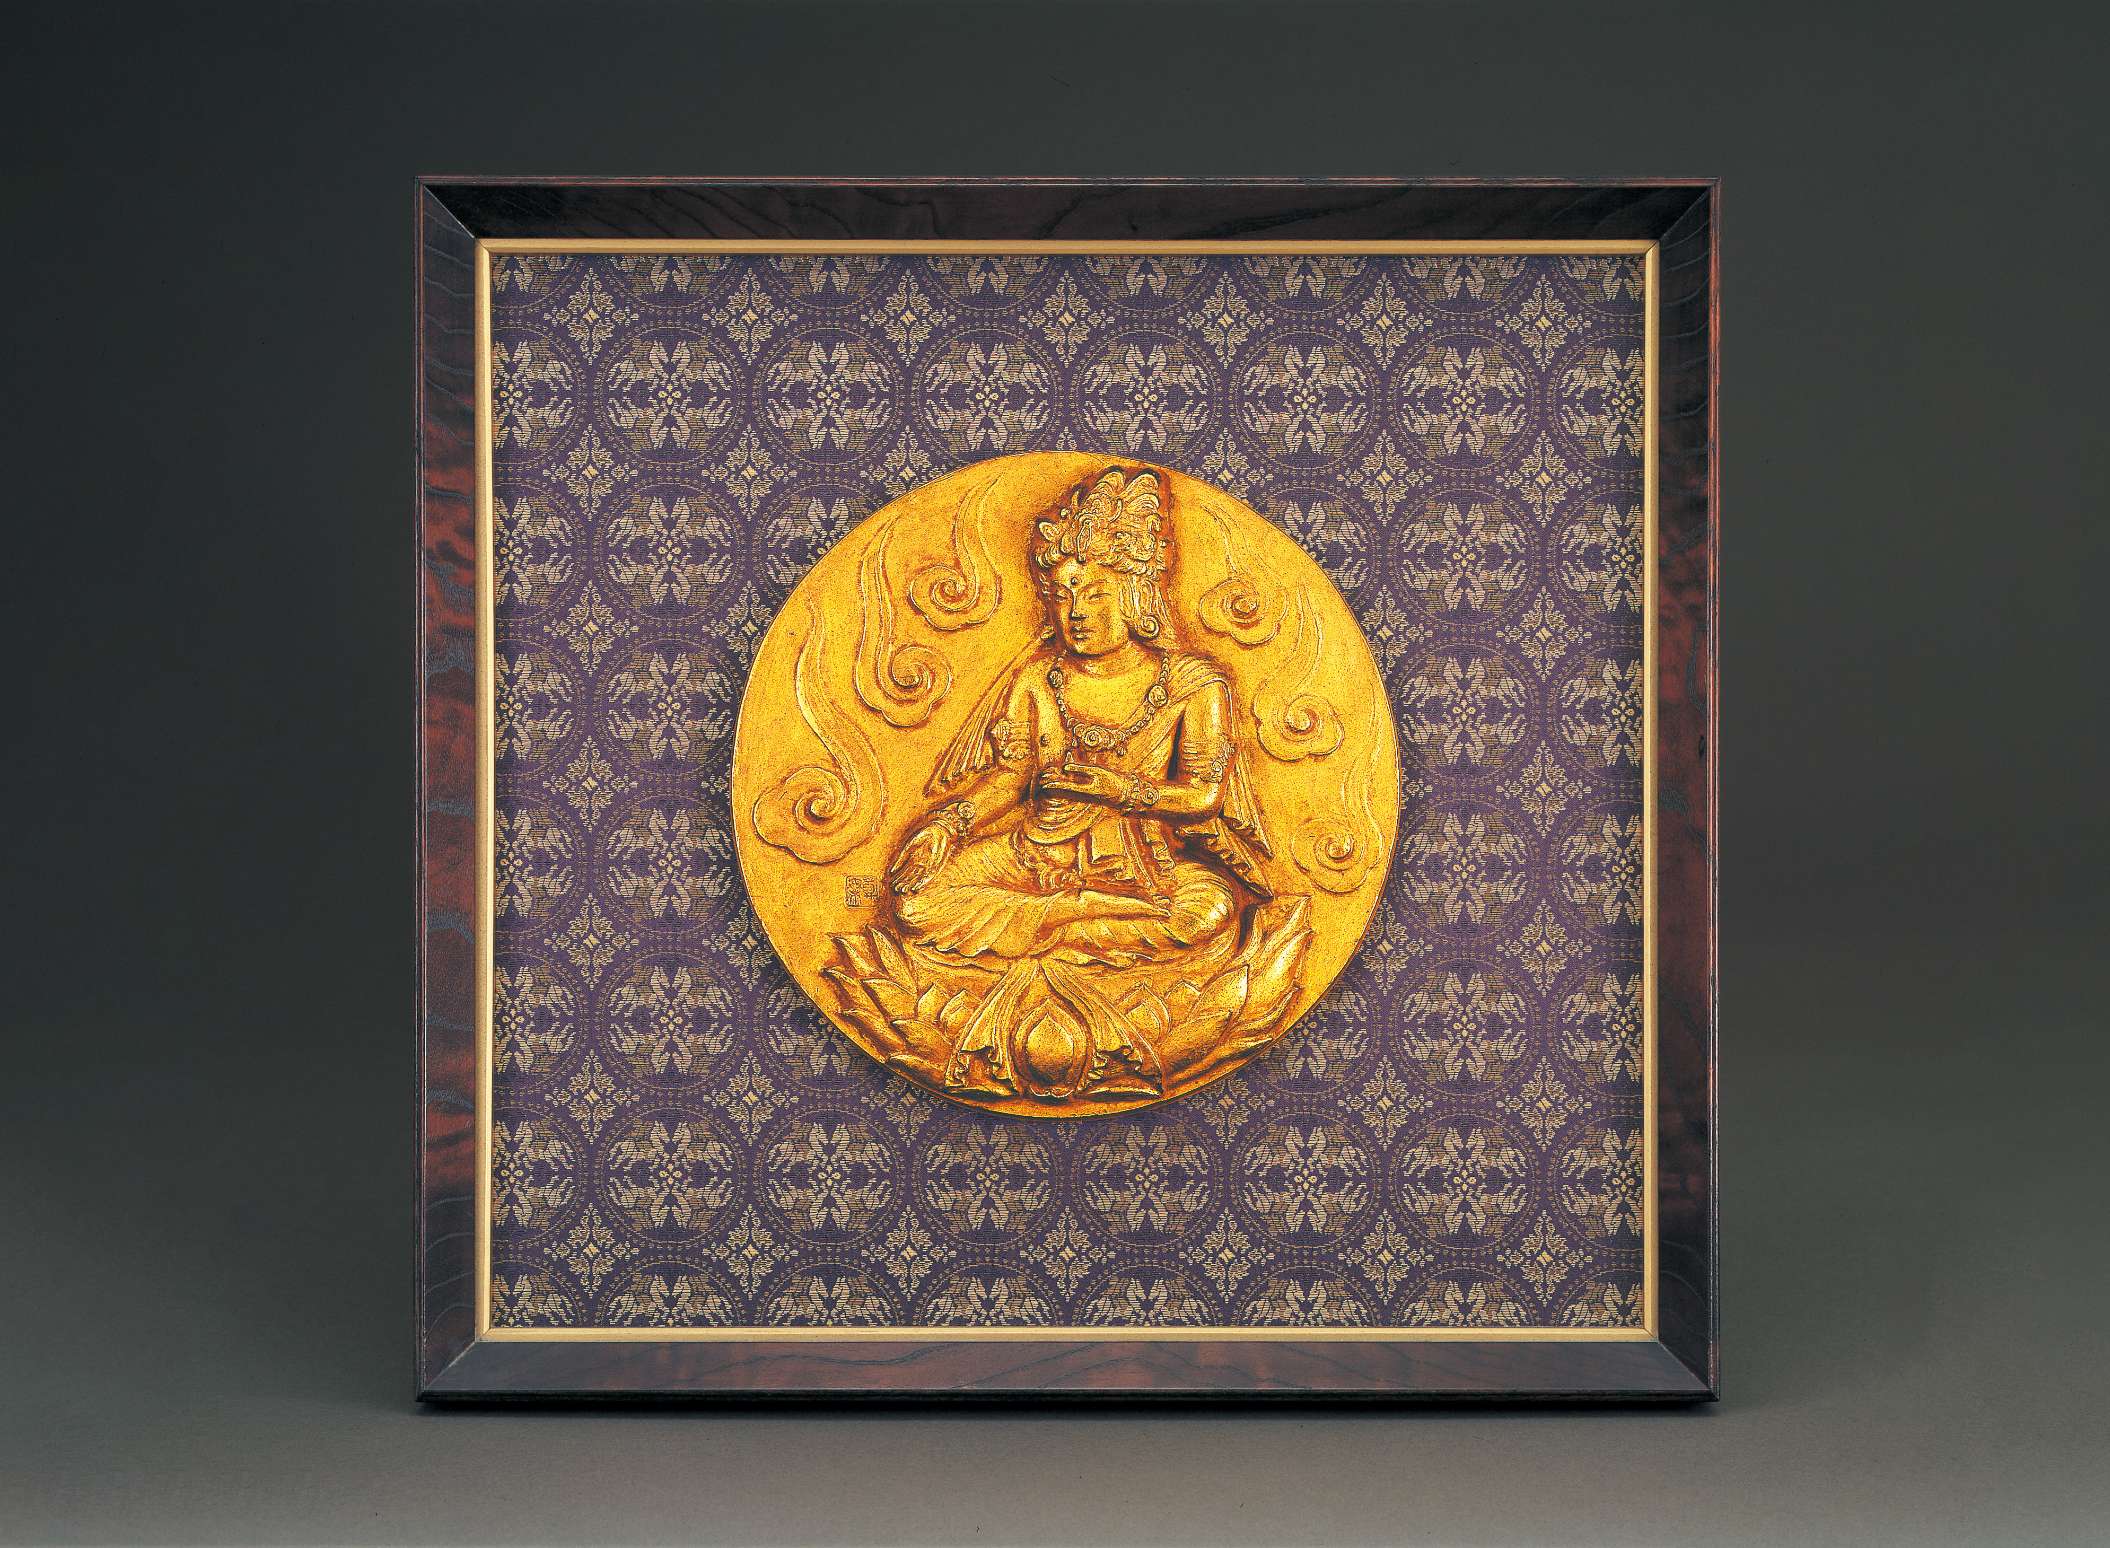 A circular golden relief of a bodhisattva in royal robes and jewelry, hair in topknot, sitting cross-legged atop a lotus seat, right hand resting palm upturned on knee, left hand raised, upturned.